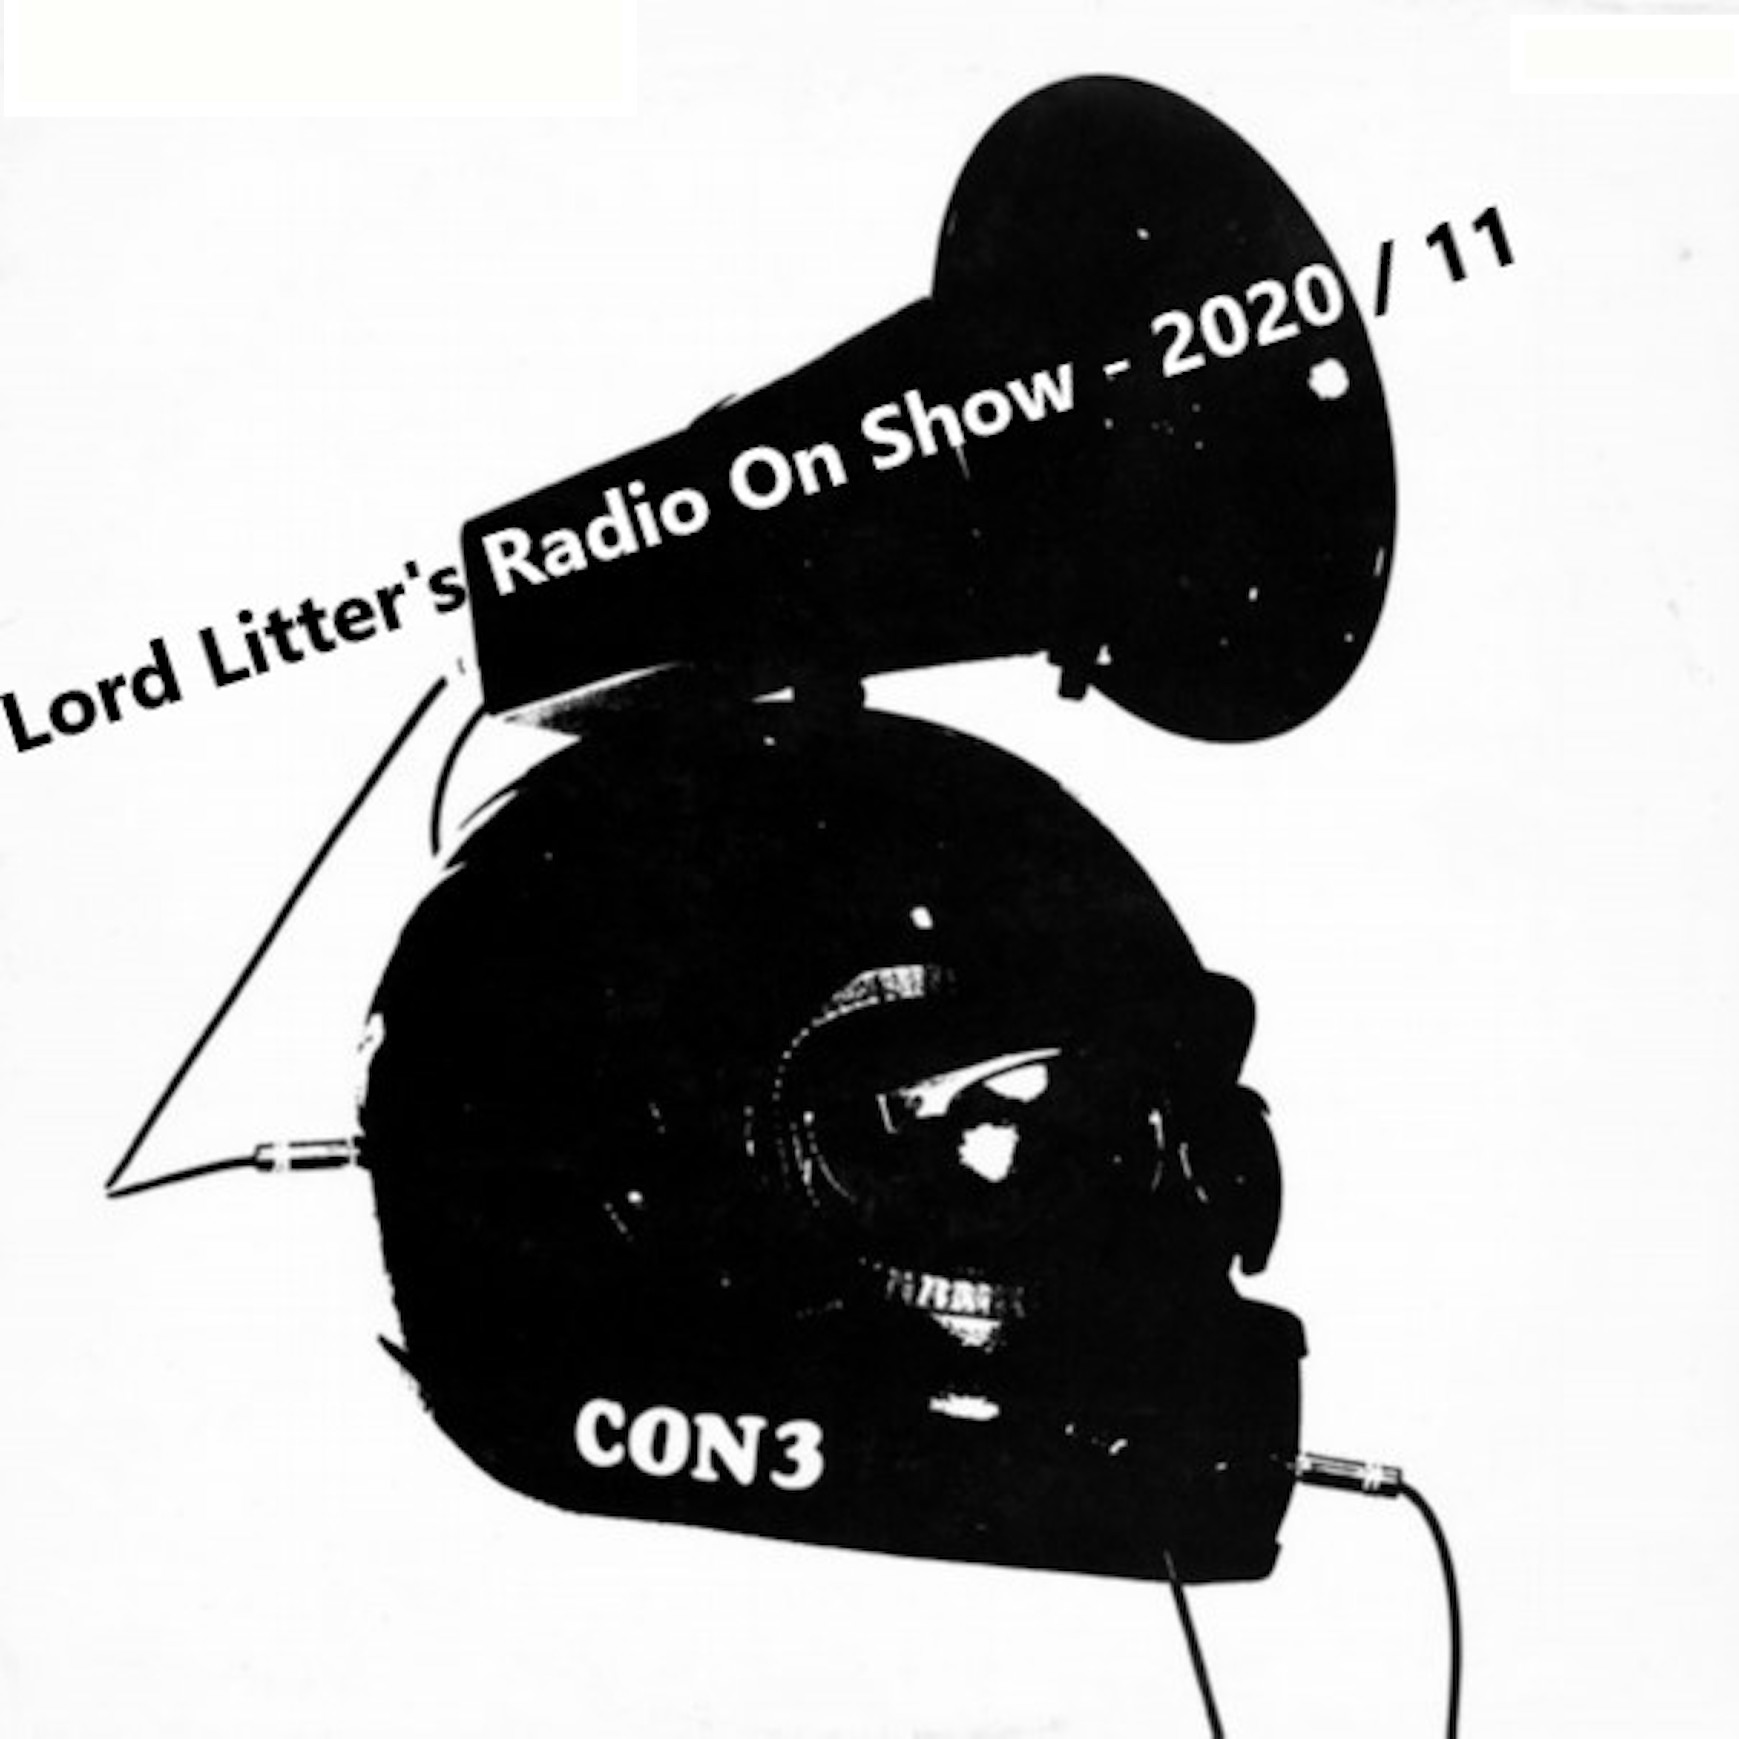 Lord Litter’s Radio On Show – Con3